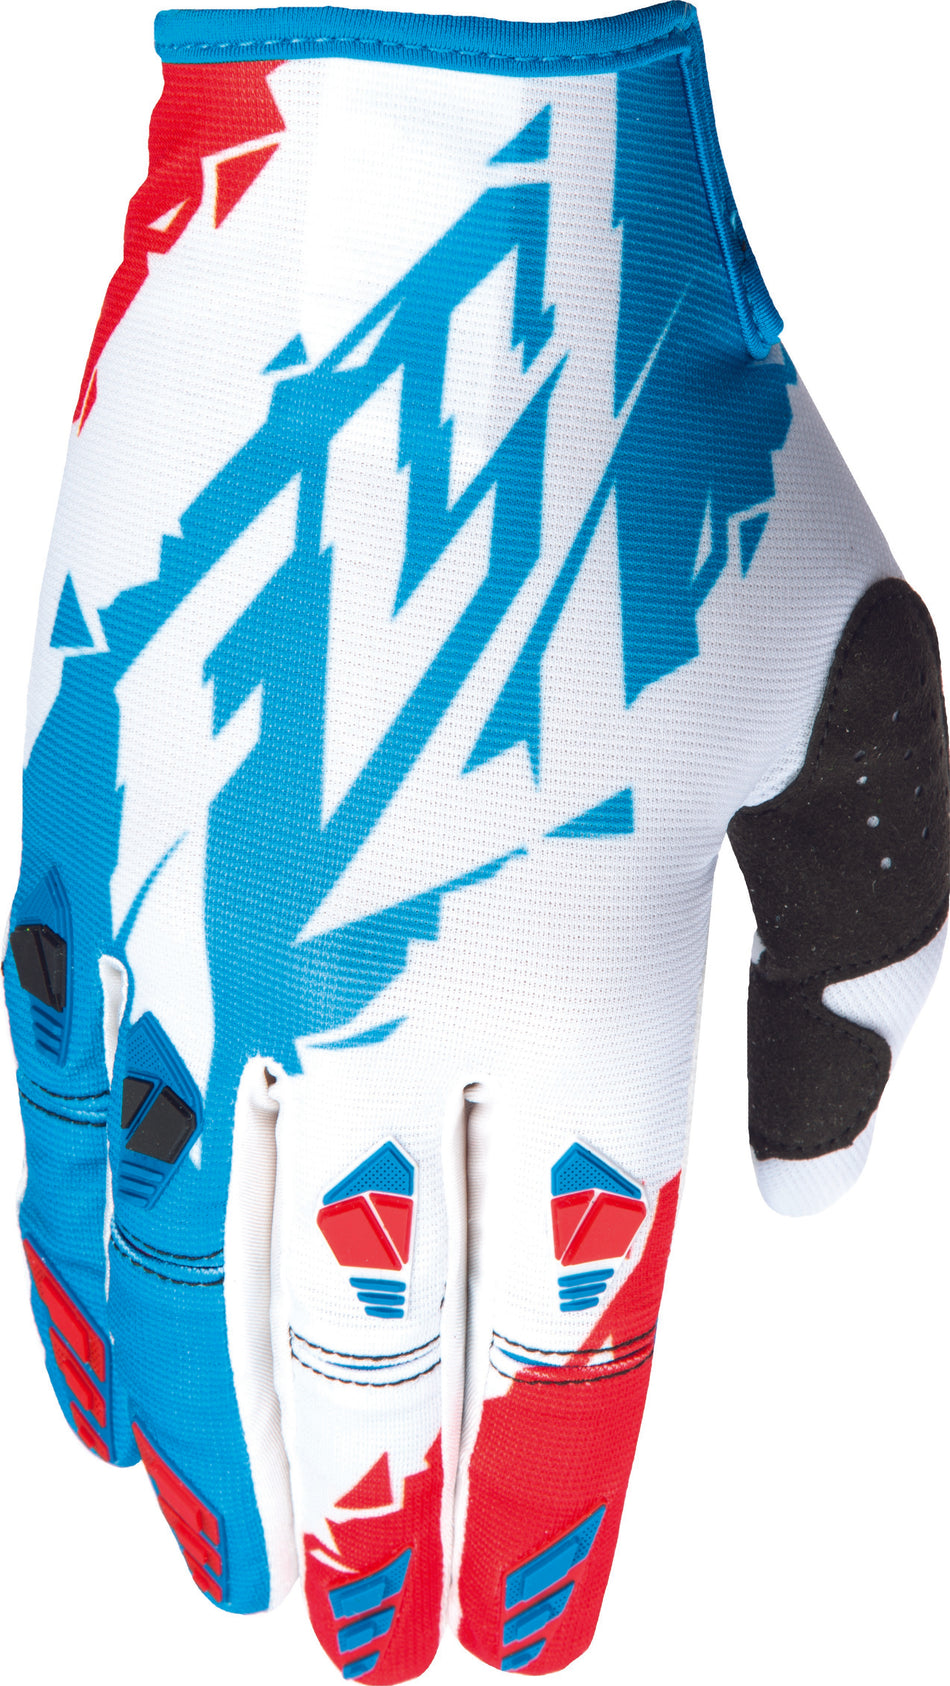 FLY RACING Kinetic Glove Red/White/Blue Sz 10 L 370-41110